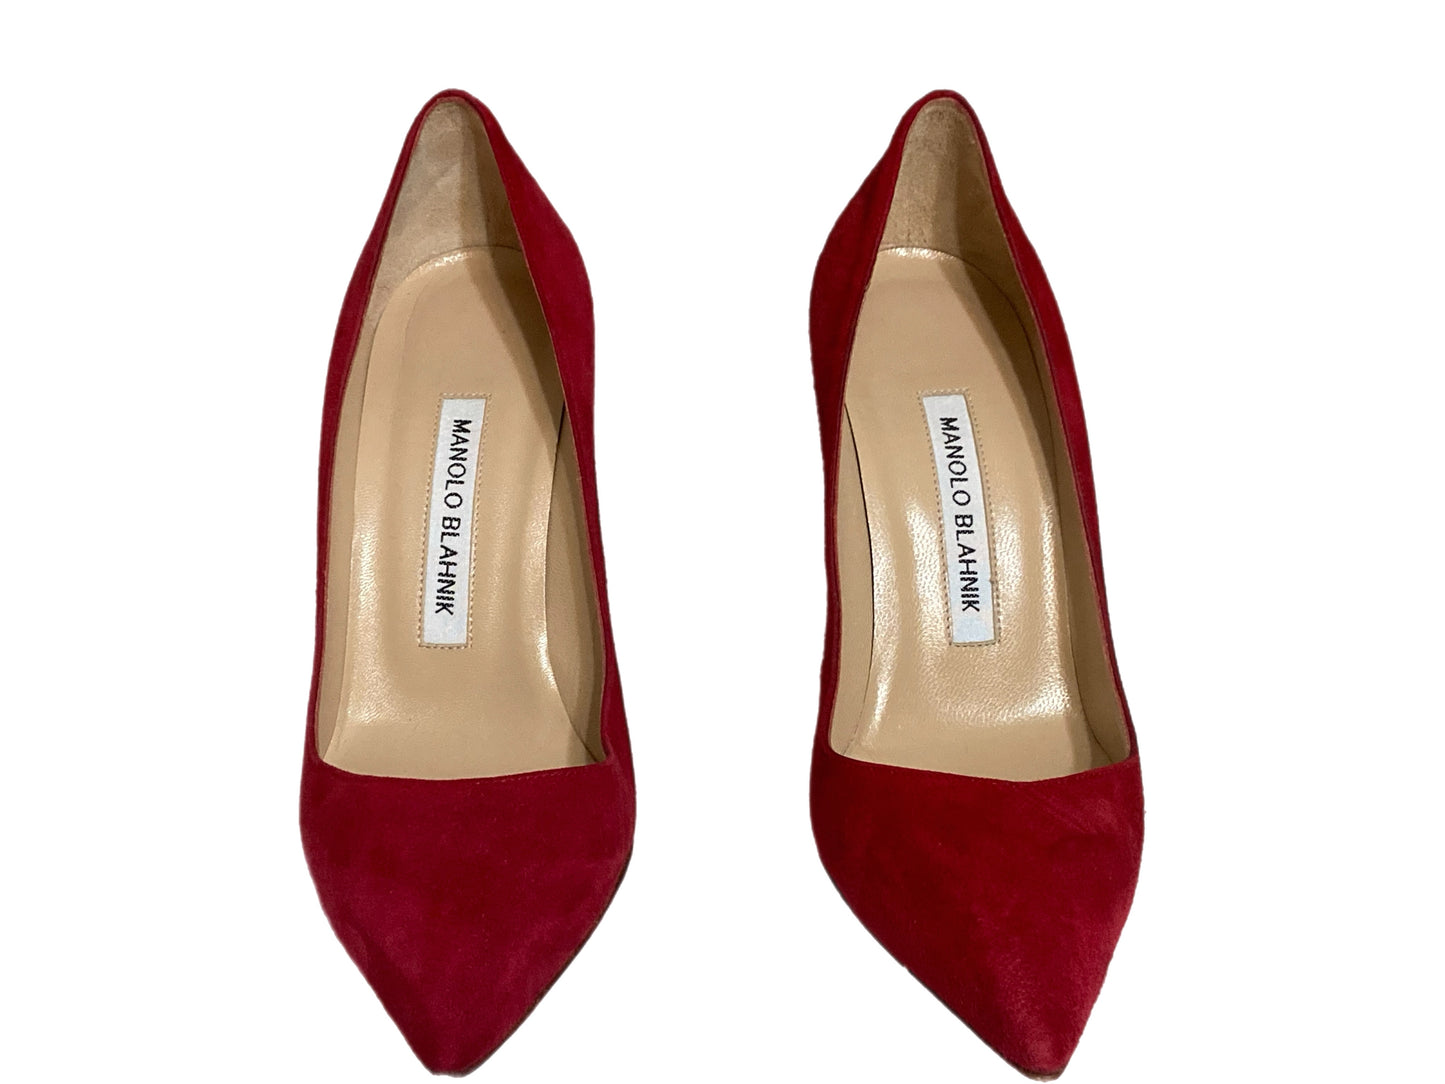 MANOLO BLAHNIK Suede Pointed Toe Pumps Red Size 35.5